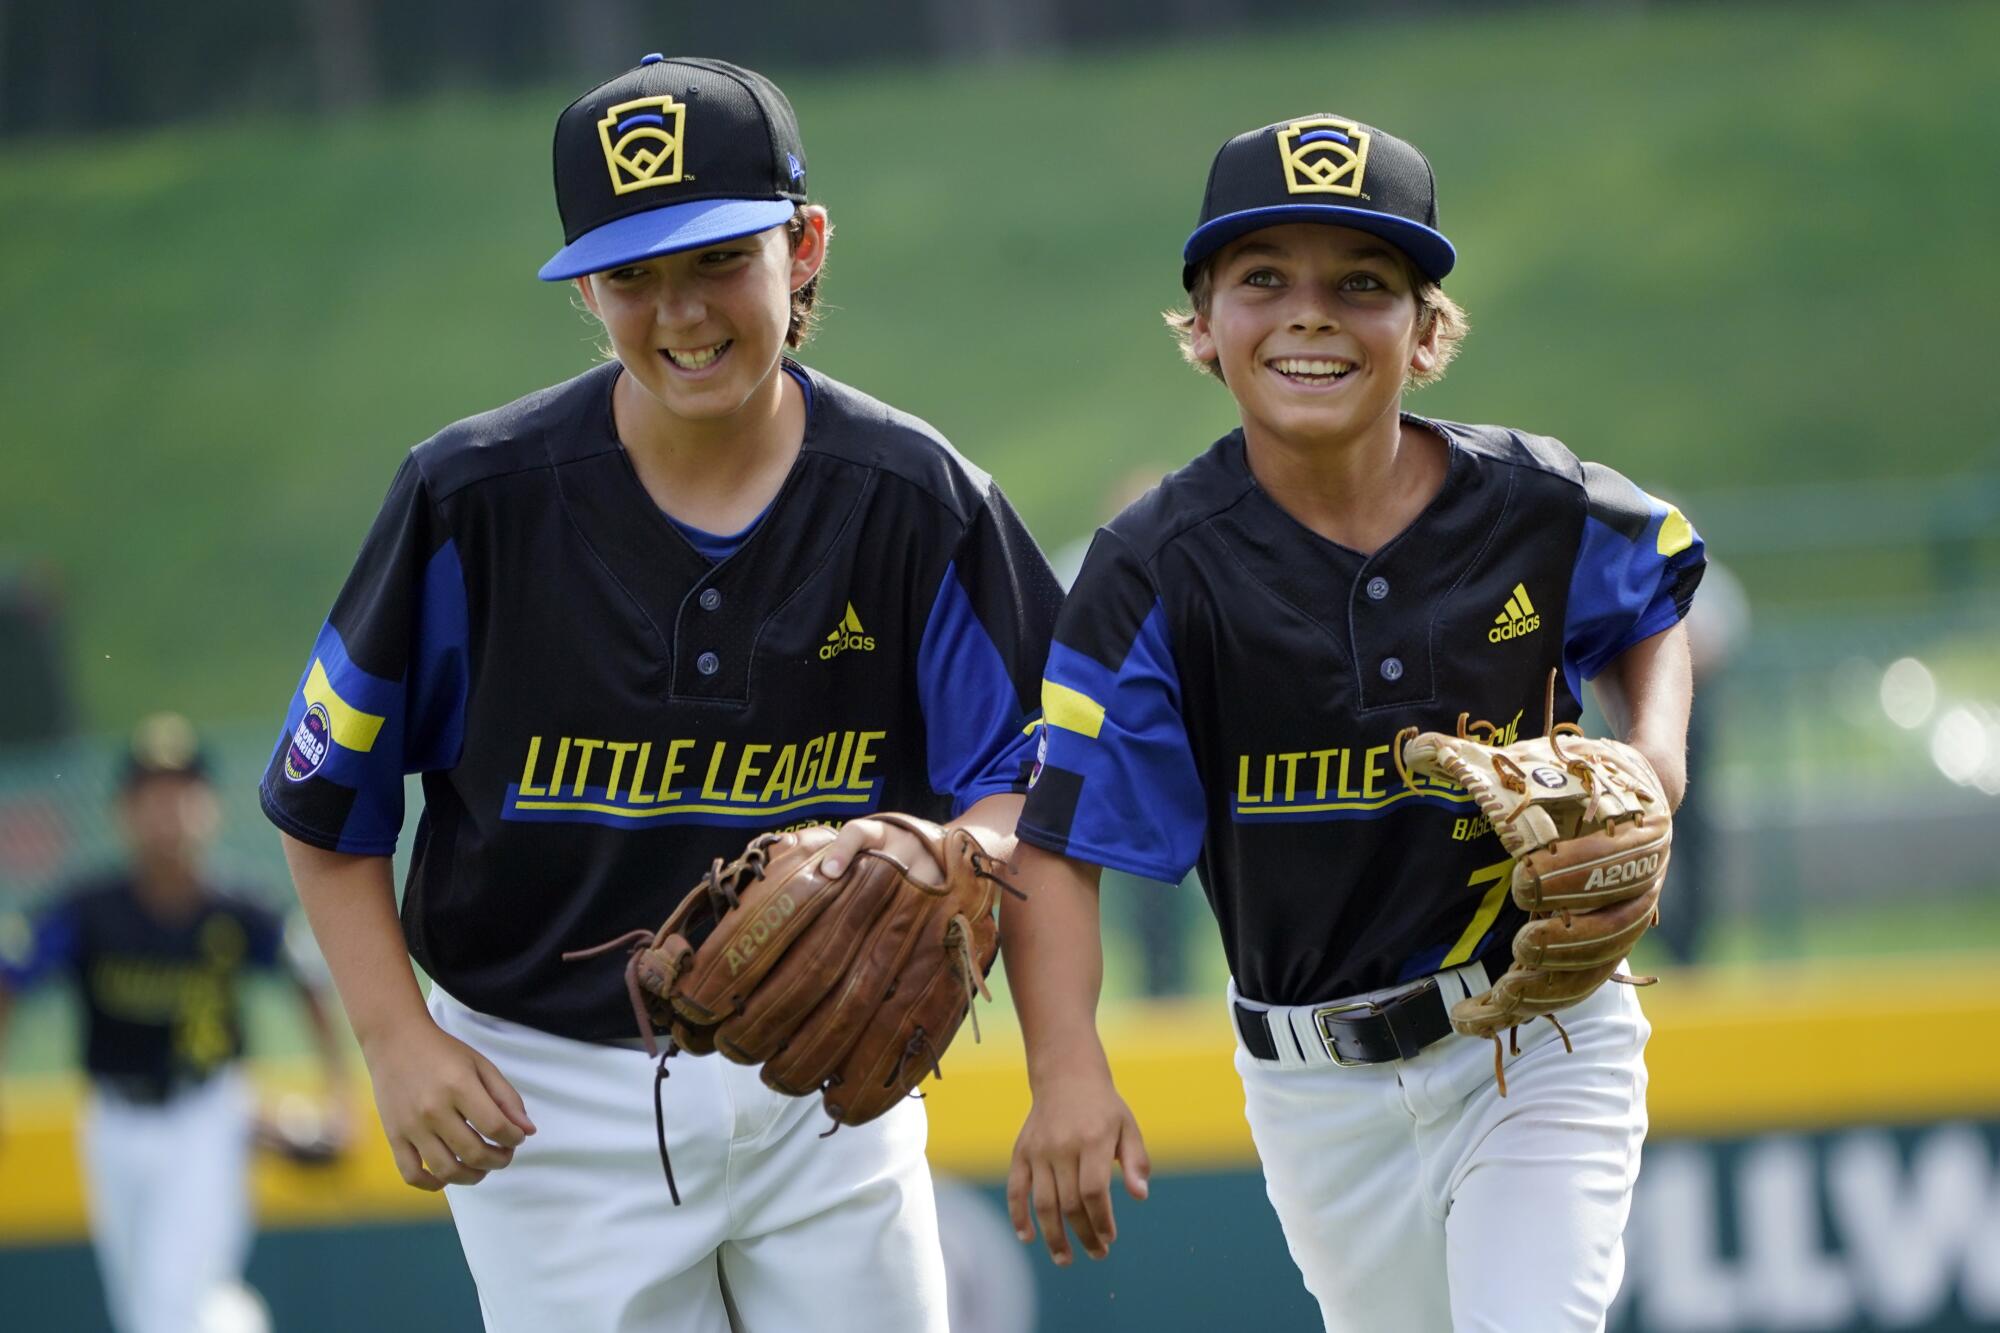 Torrance, Calif.'s Dominic Golia and pitcher Xavier Navarro smile as the run off the field